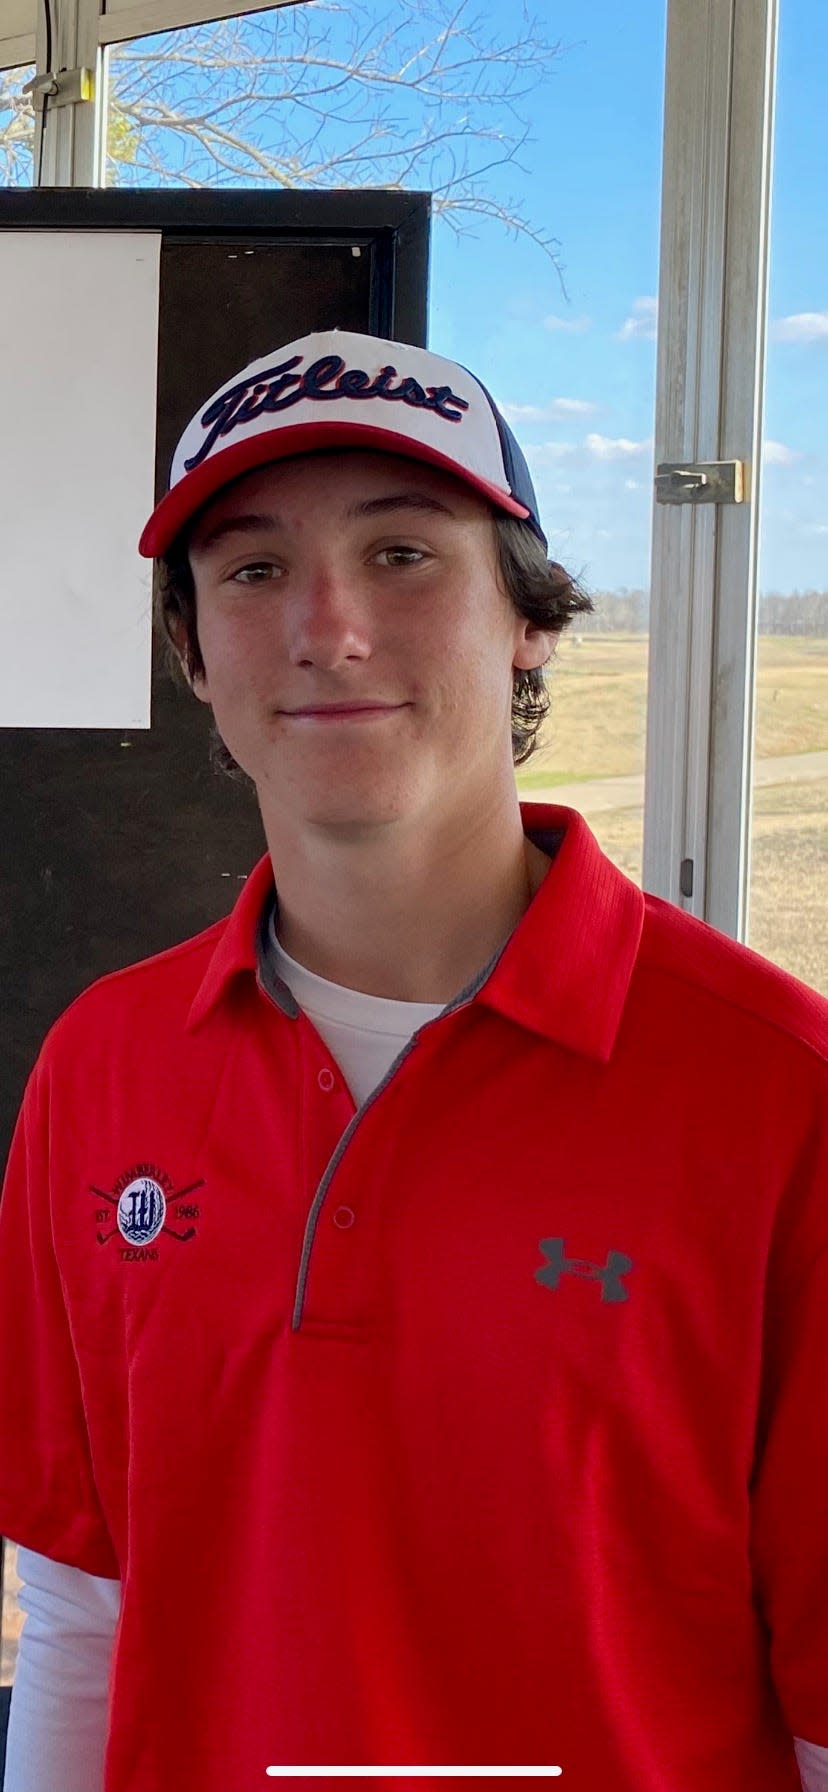 Wimberley junior Jaxon Donaldson won last week's Class 4A individual state title at the UIL state golf tournament in Kingsland. It was his second state crown; he also won state when he was a freshman. He played soccer for many years before he gave it up to play golf.